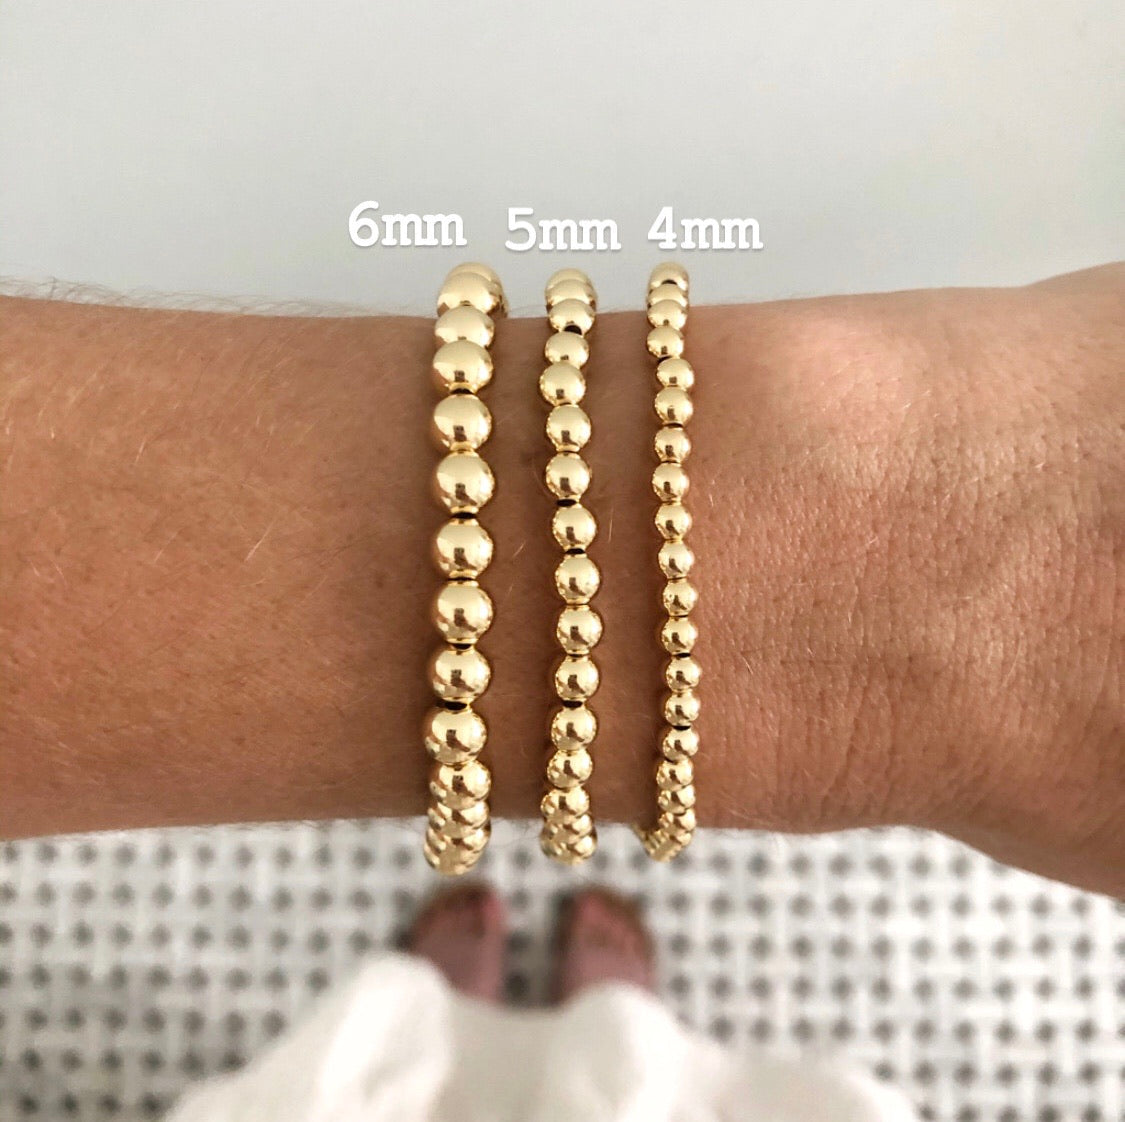 Yellow Smiley + Gold Ball Beaded Stackable Bracelet